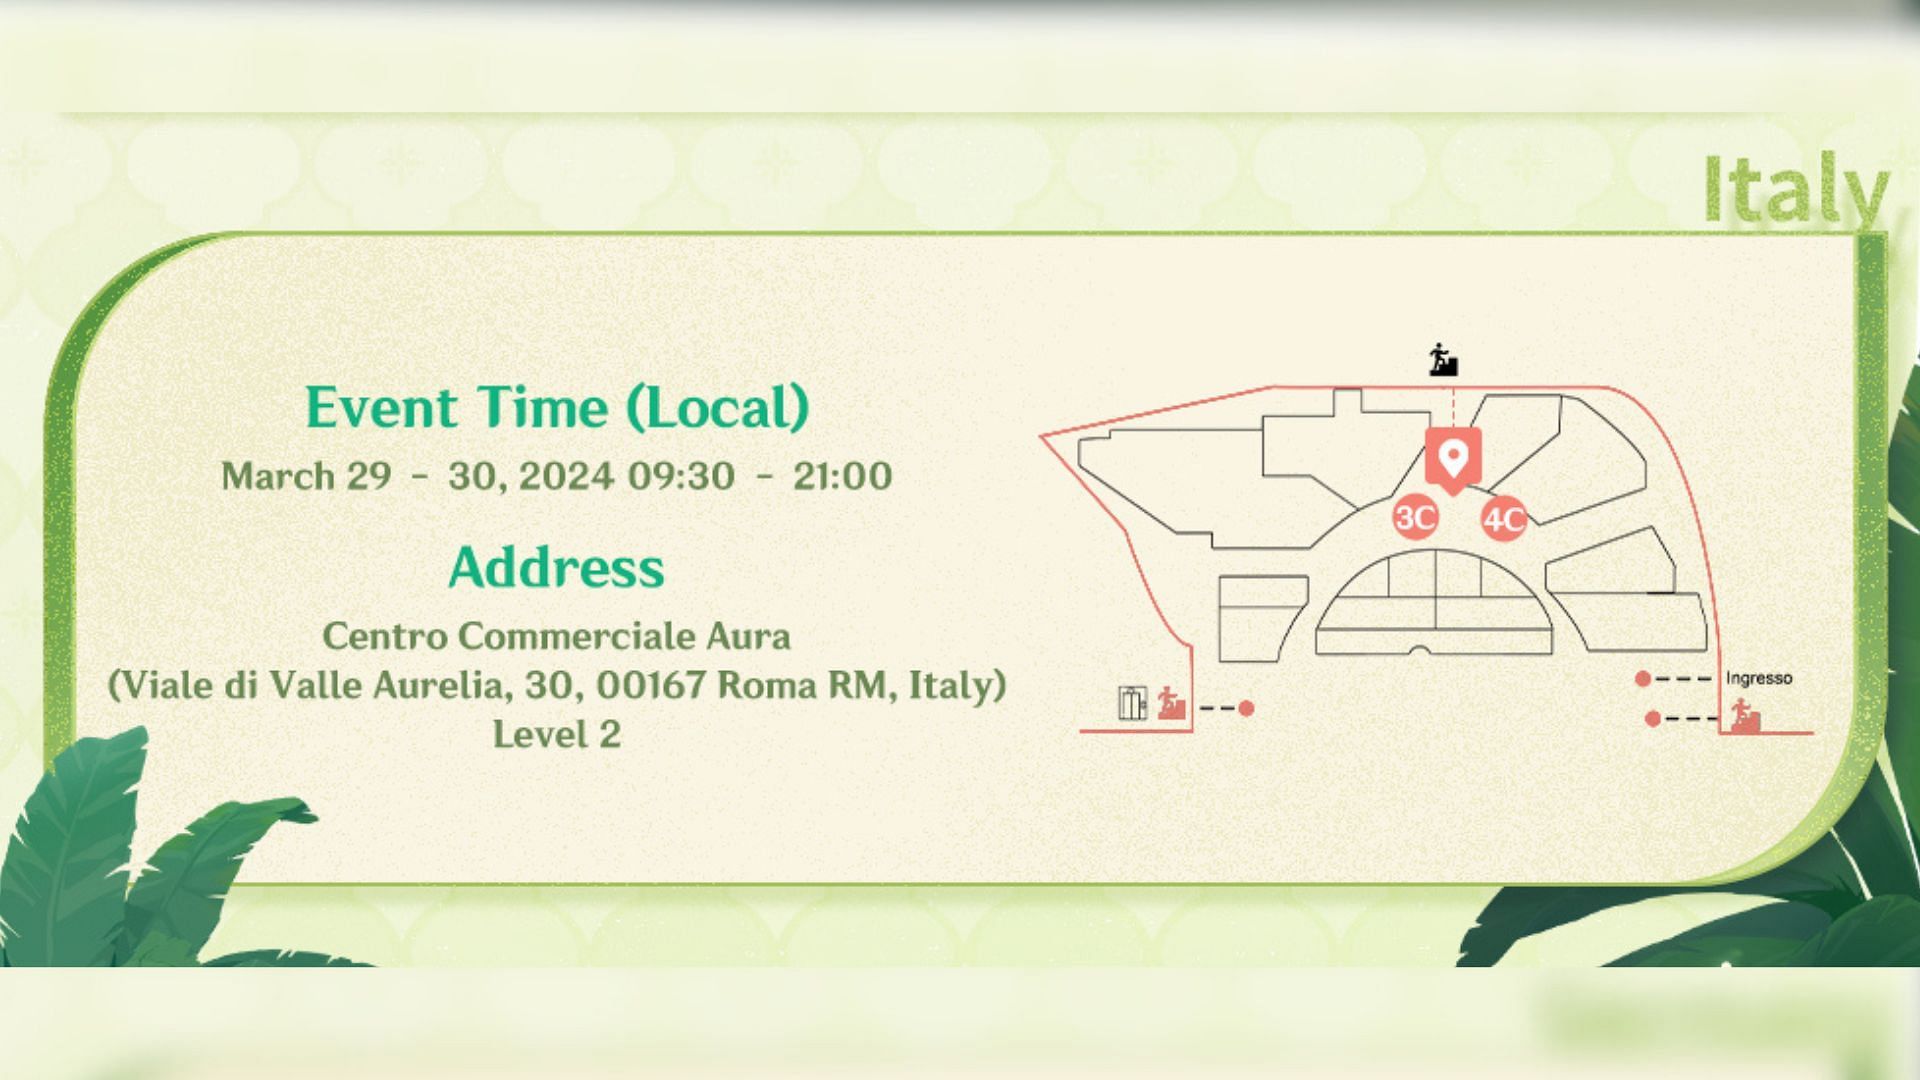 Italy event time and address (Image via HoYoverse)